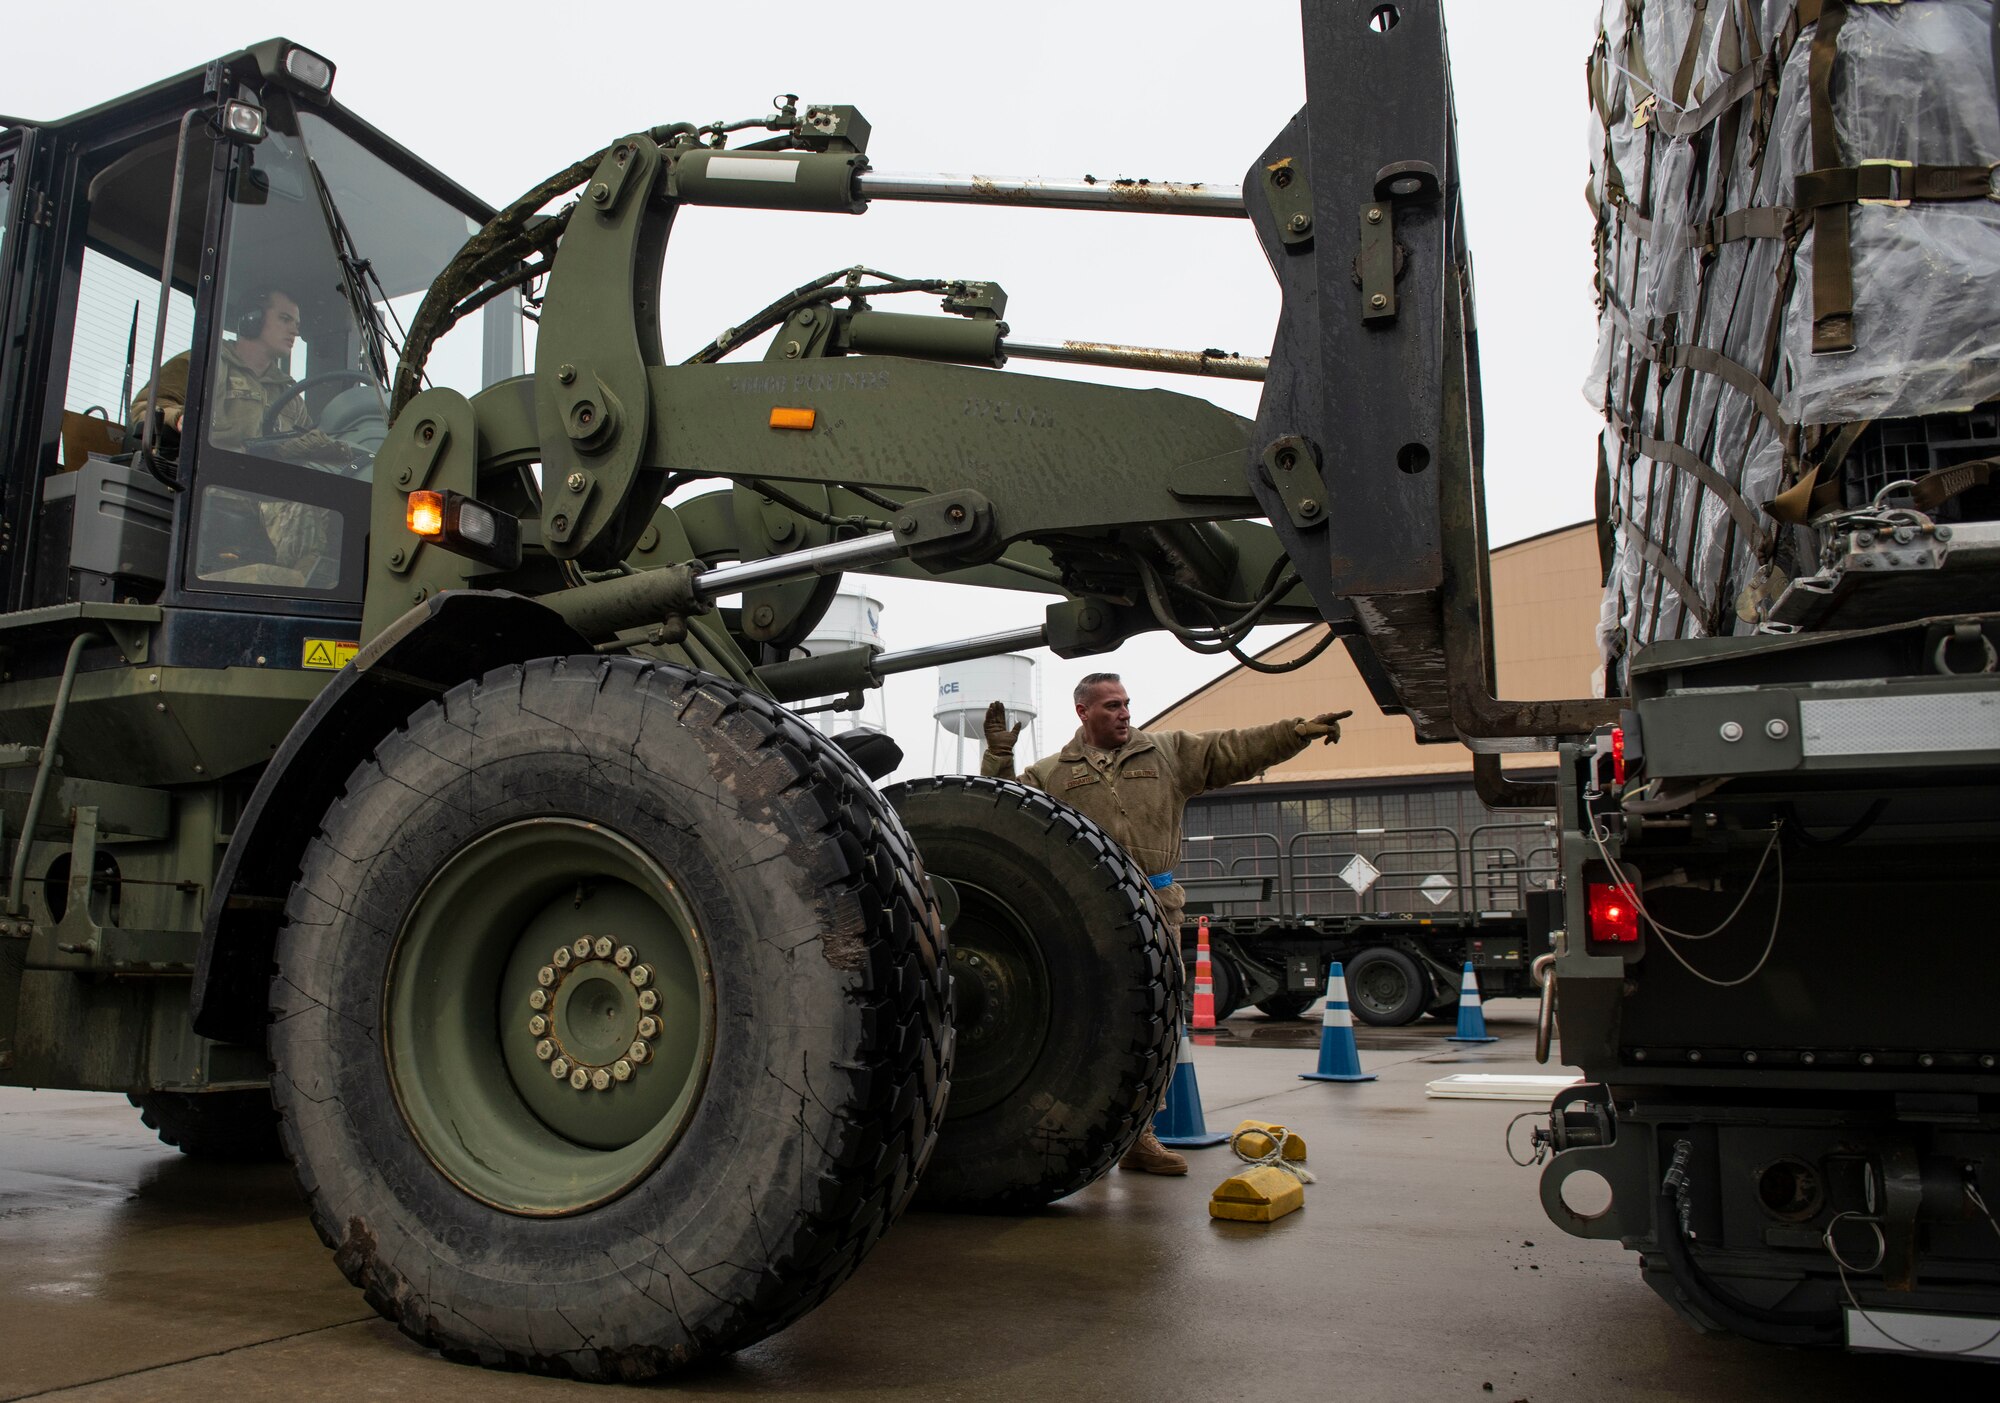 Tech. Sgt. Alfredo Cervantes, 375th Logistics Readiness Squadron NCO in charge of air transportation, guides Staff Sgt. Chance Sheek, 375th LRS ground transportation craftsman, as he operates a forklift carrying cargo during a mobility exercise, Jan. 23, 2019, at Scott Air Force Base, Illinois. Cervantes and Sheek were part of the Cargo Deployment Function, a team that ensures pallets are loaded onto an aircraft in a safe way that does not interfere with its center of gravity .